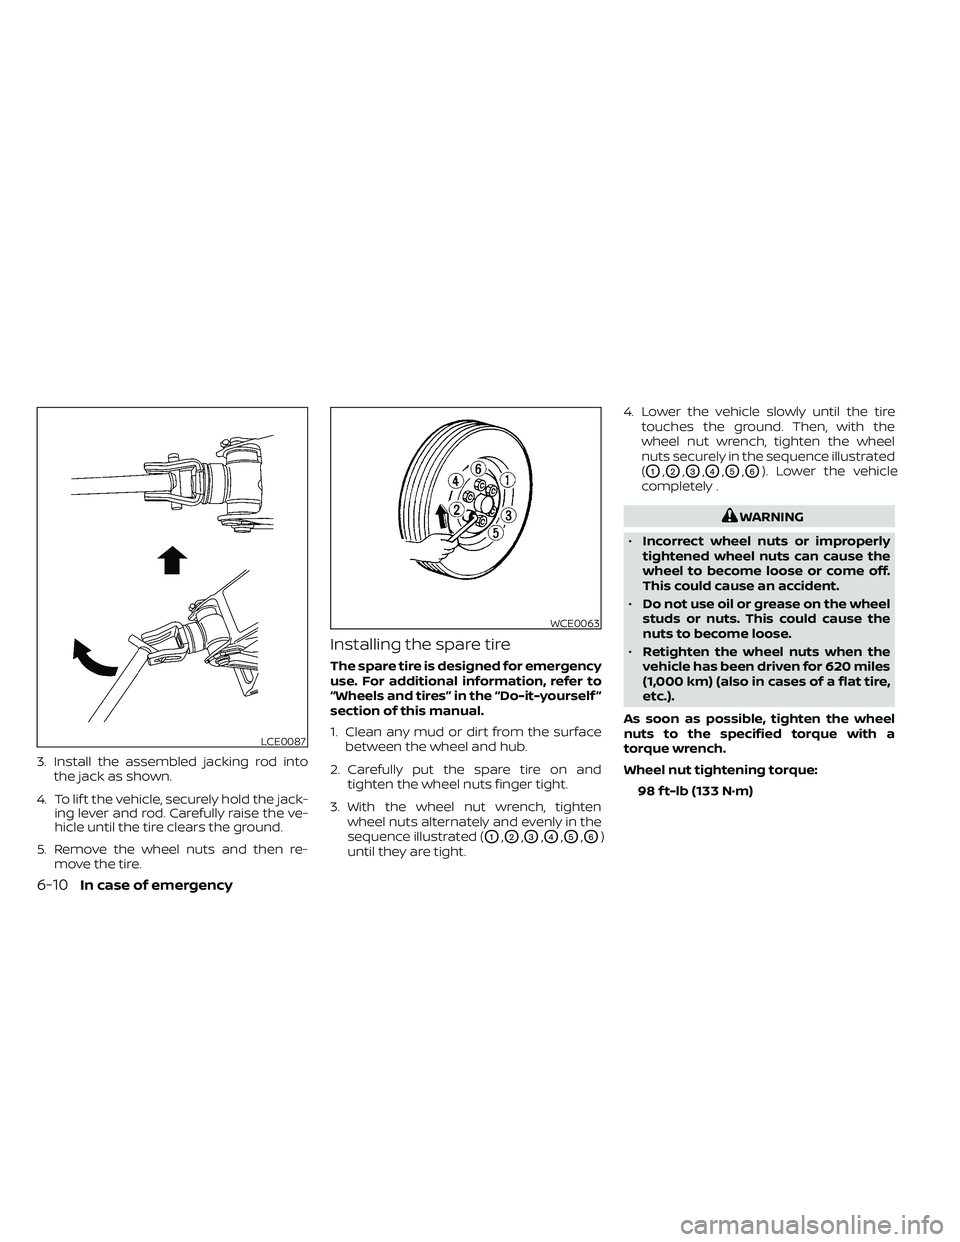 NISSAN FRONTIER 2021  Owners Manual 3. Install the assembled jacking rod intothe jack as shown.
4. To lif t the vehicle, securely hold the jack- ing lever and rod. Carefully raise the ve-
hicle until the tire clears the ground.
5. Remov